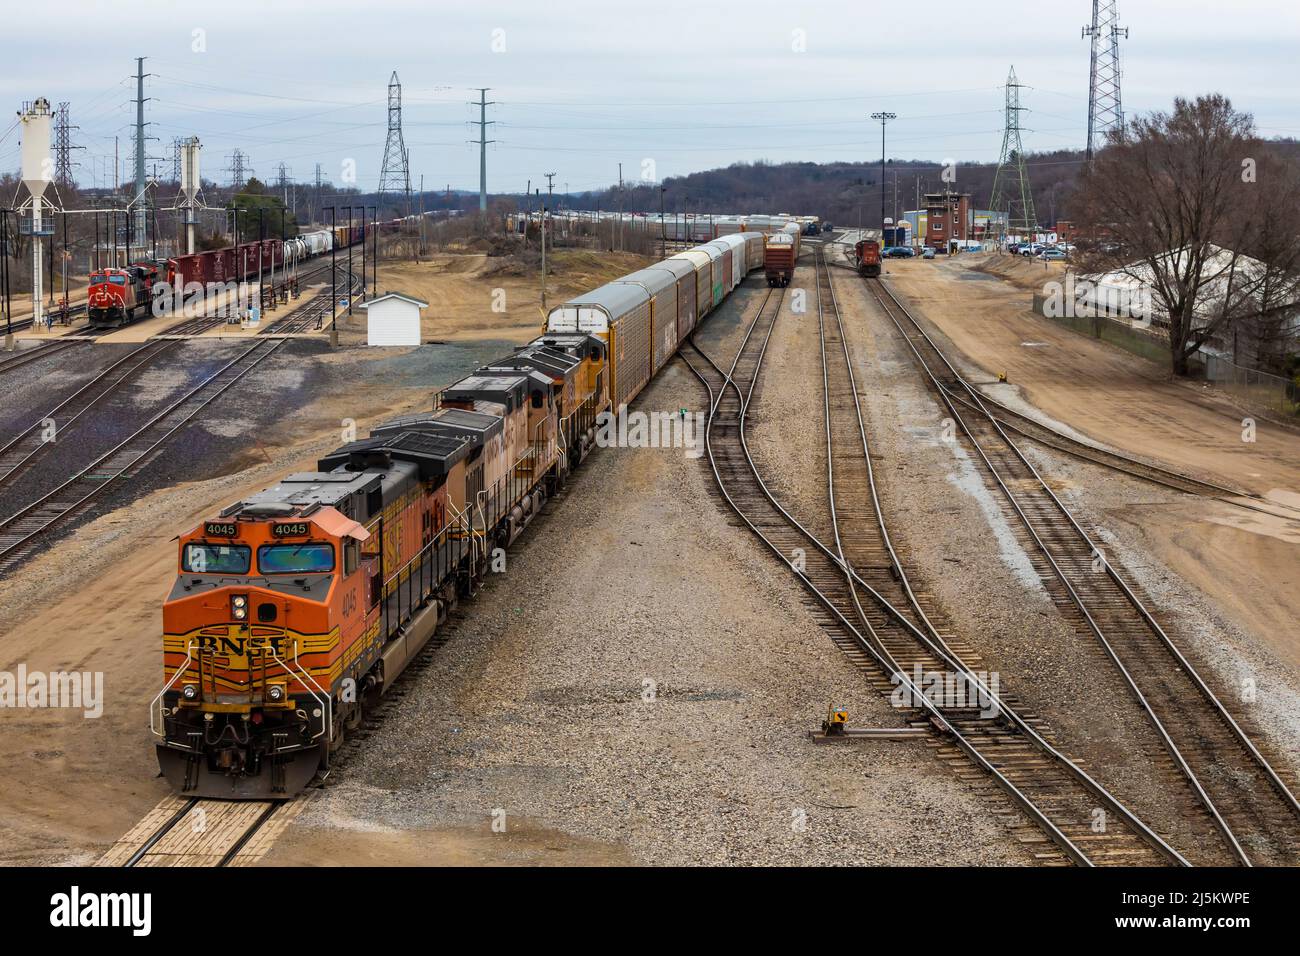 CN Battle Creek Yard for trains, important for transporting autos and auto parts, Michigan, USA [No property release; editorial licensing only] Stock Photo